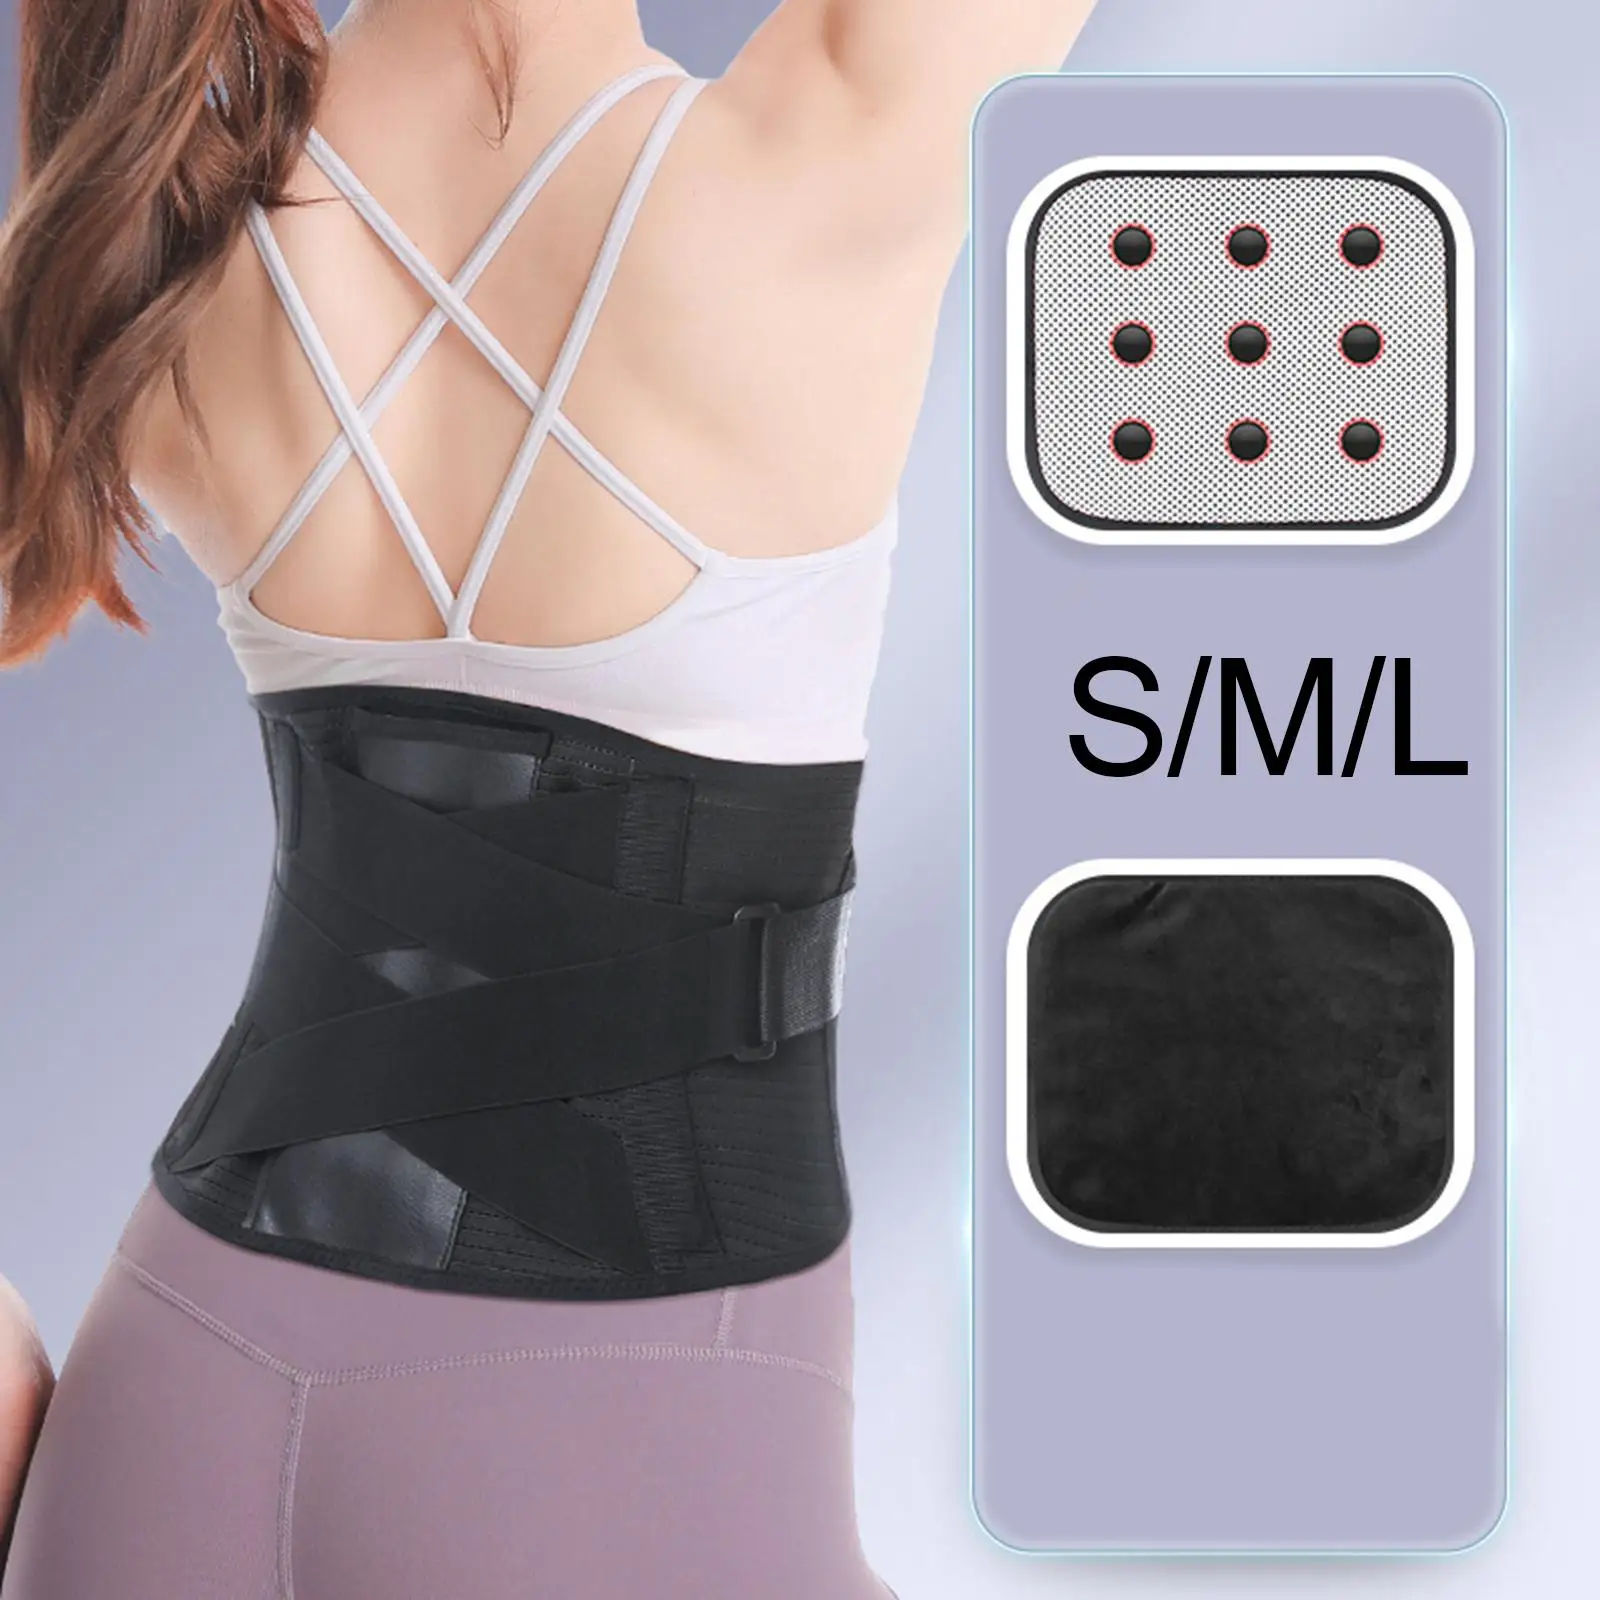 Waist Support Belt Self Heating with Removable Pad Adjustable Support Straps Back  for Exercise Workout Men Women